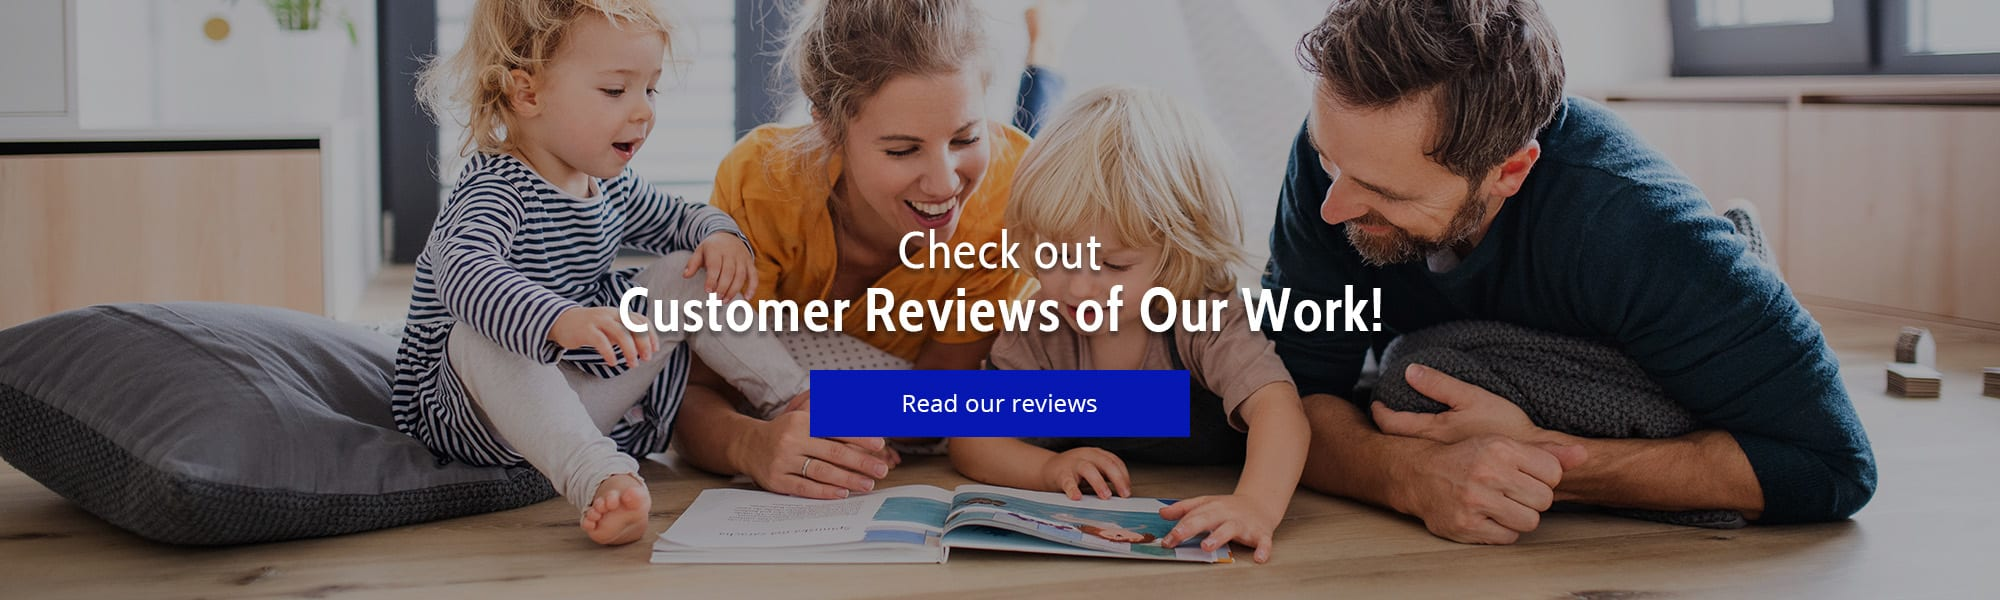 Check out customer reviews of our work!